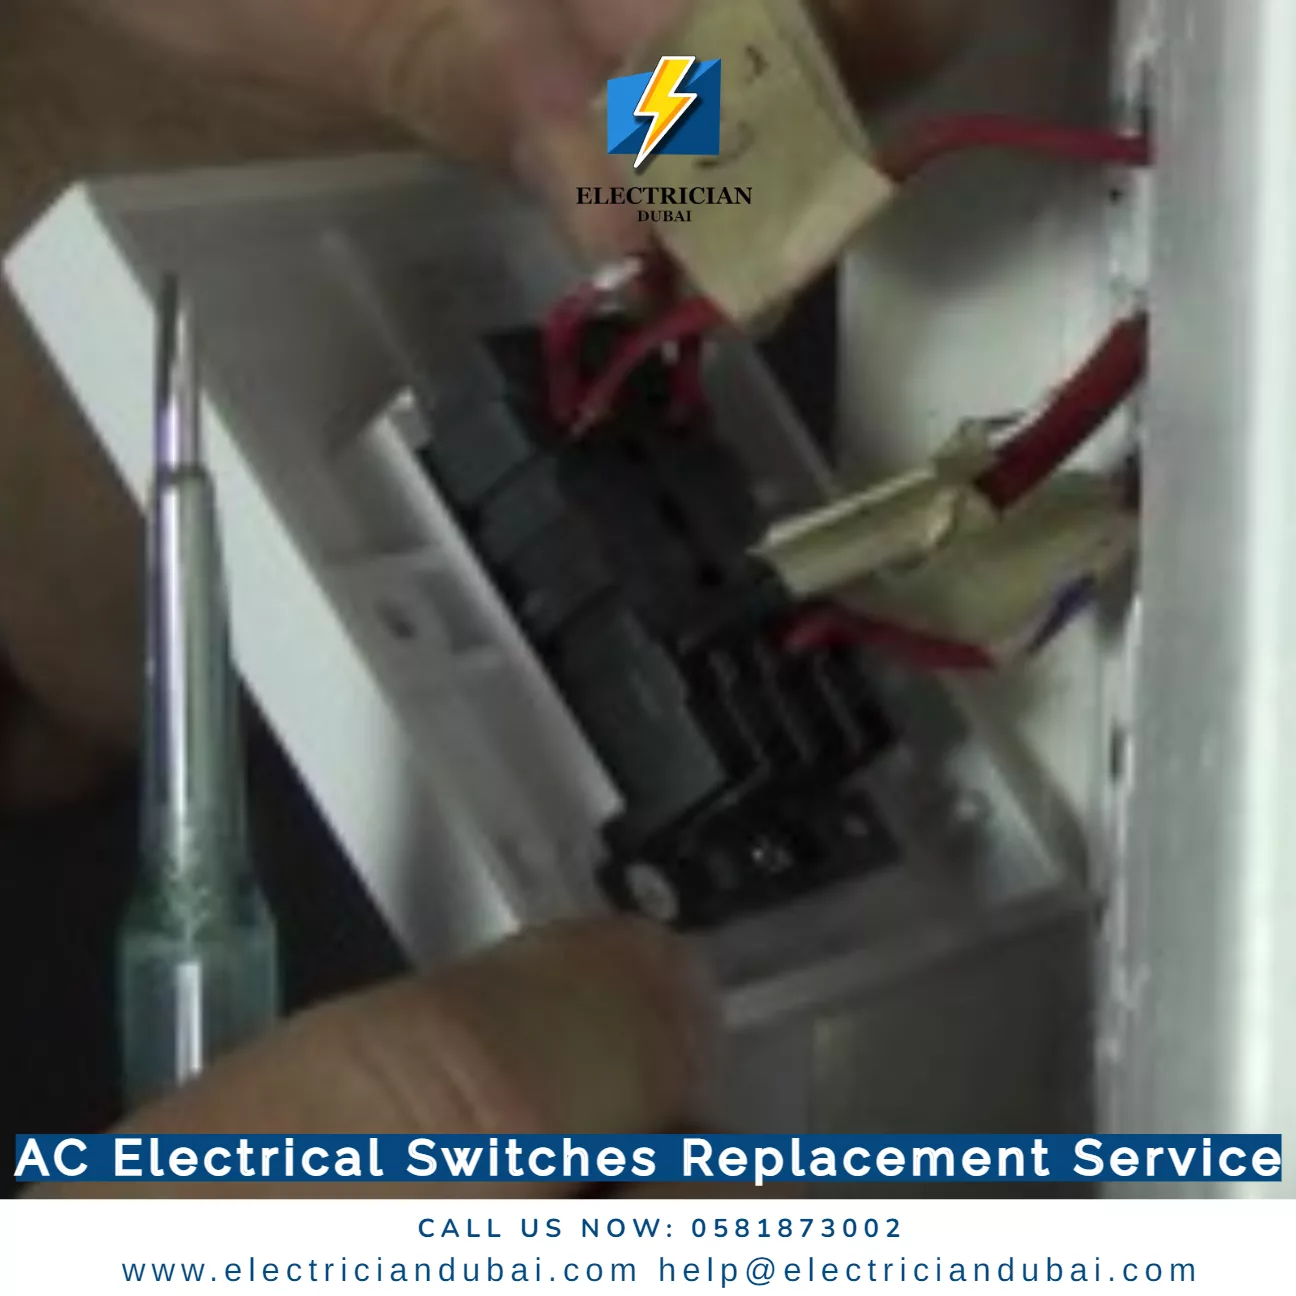 AC Electrical Switches Replacement Service in Dubai